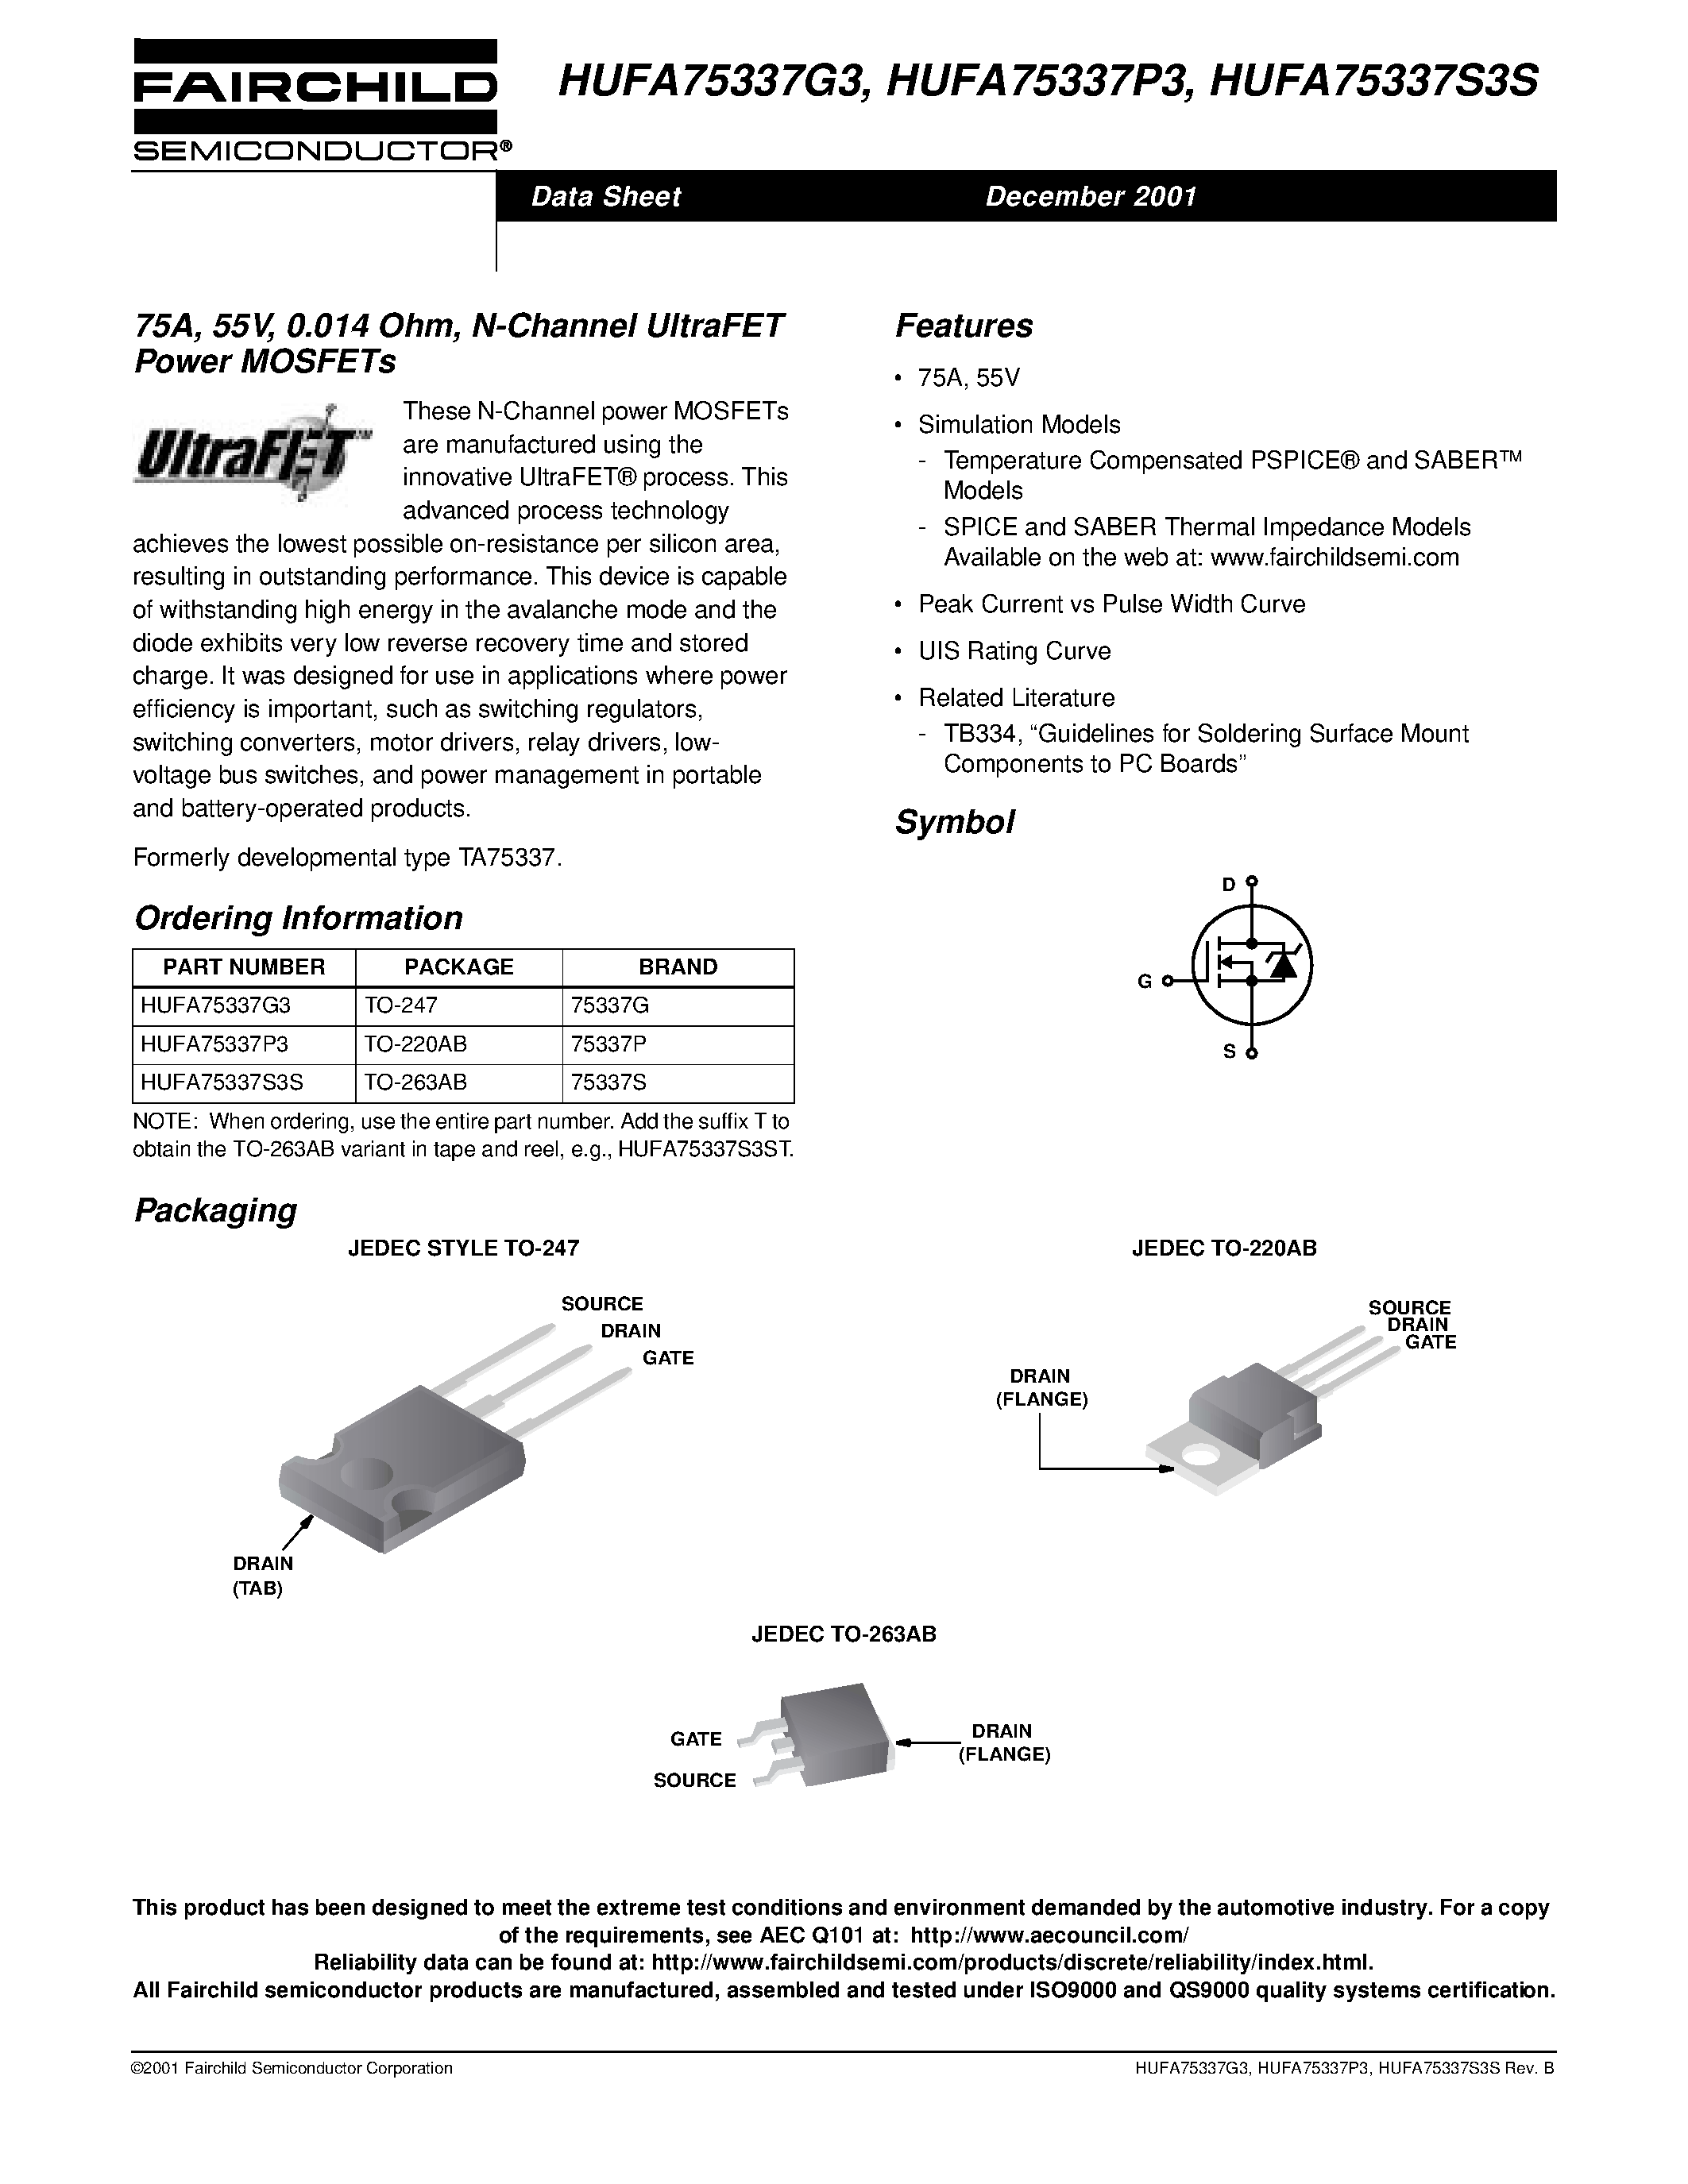 Даташит HUFA75339G3 - 75A/ 55V/ 0.012 Ohm/ N-Channel UltraFET Power MOSFETs страница 1